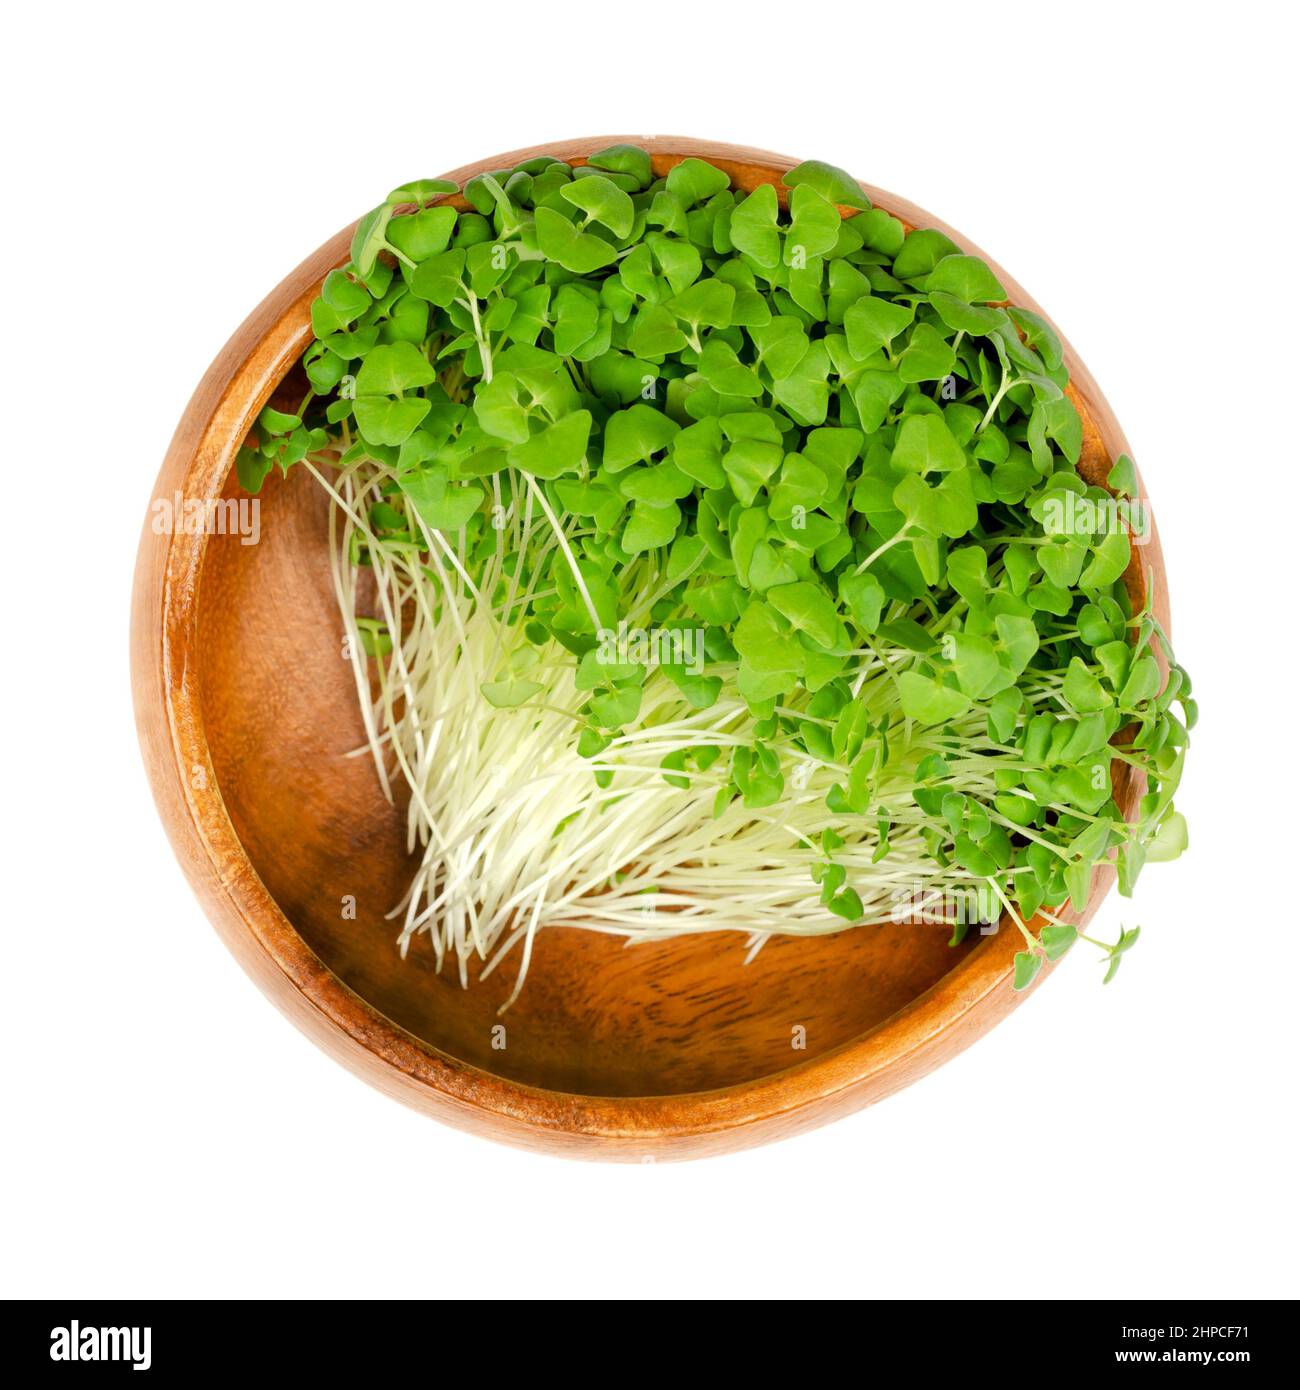 Chia microgreens in a wooden bowl. Seedlings and green shoots of Salvia hispanica, a flowering plant in the mint family (Lamiaceae). Stock Photo